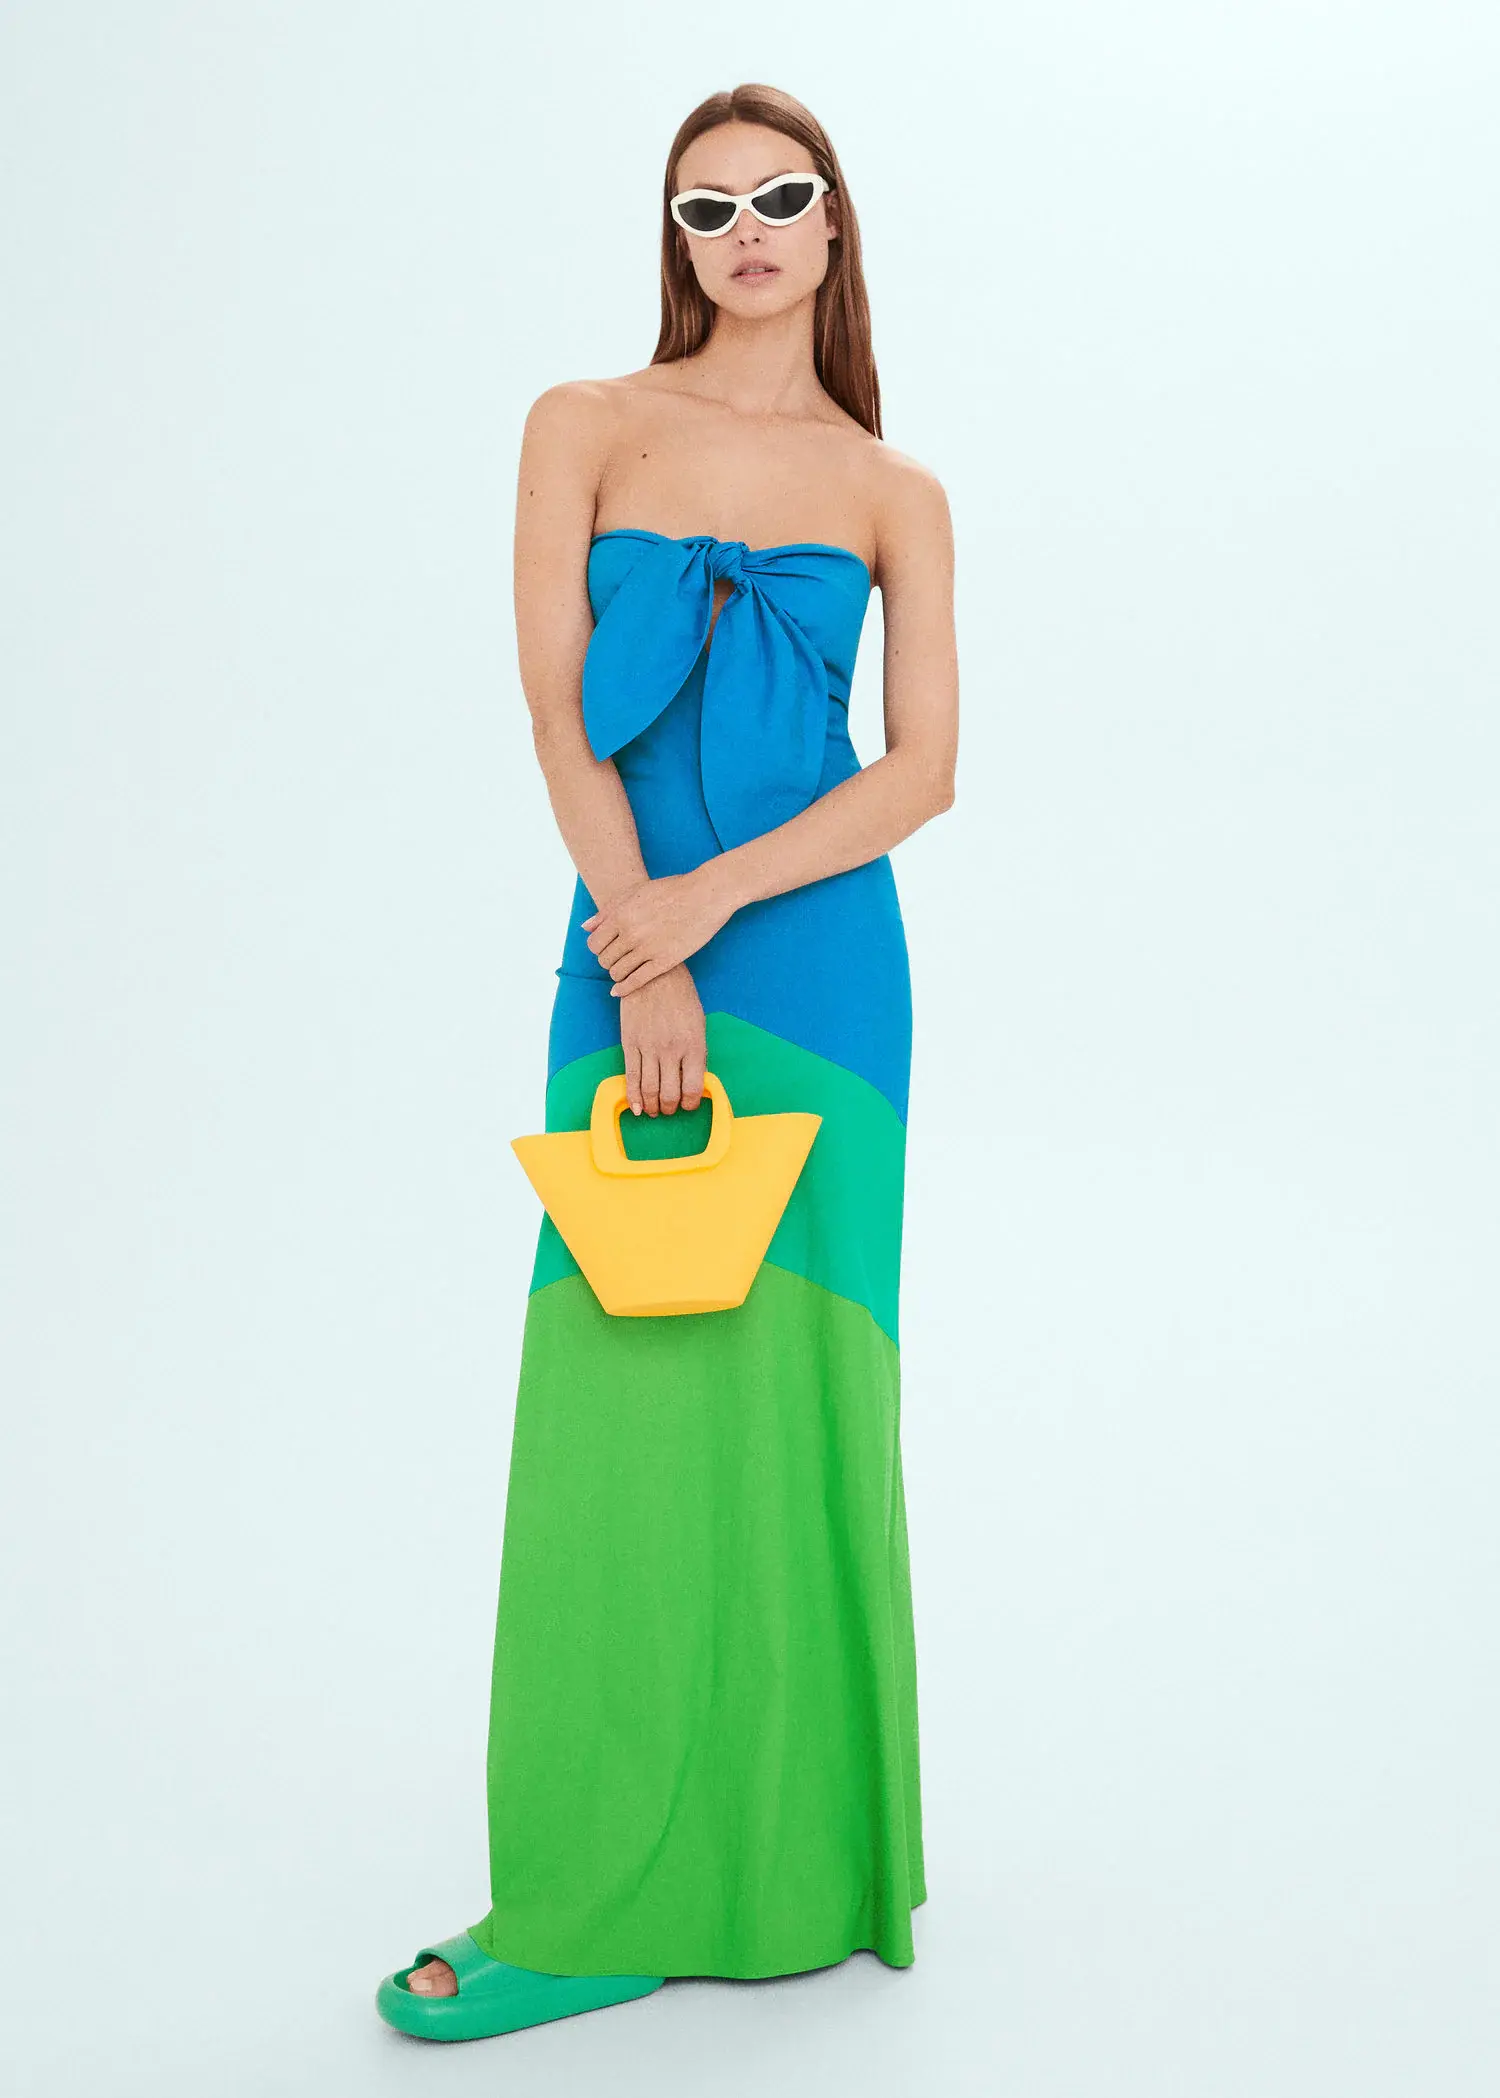 Mango Multi-coloured dress with knot neckline. a woman in a blue and green dress holding a yellow purse. 